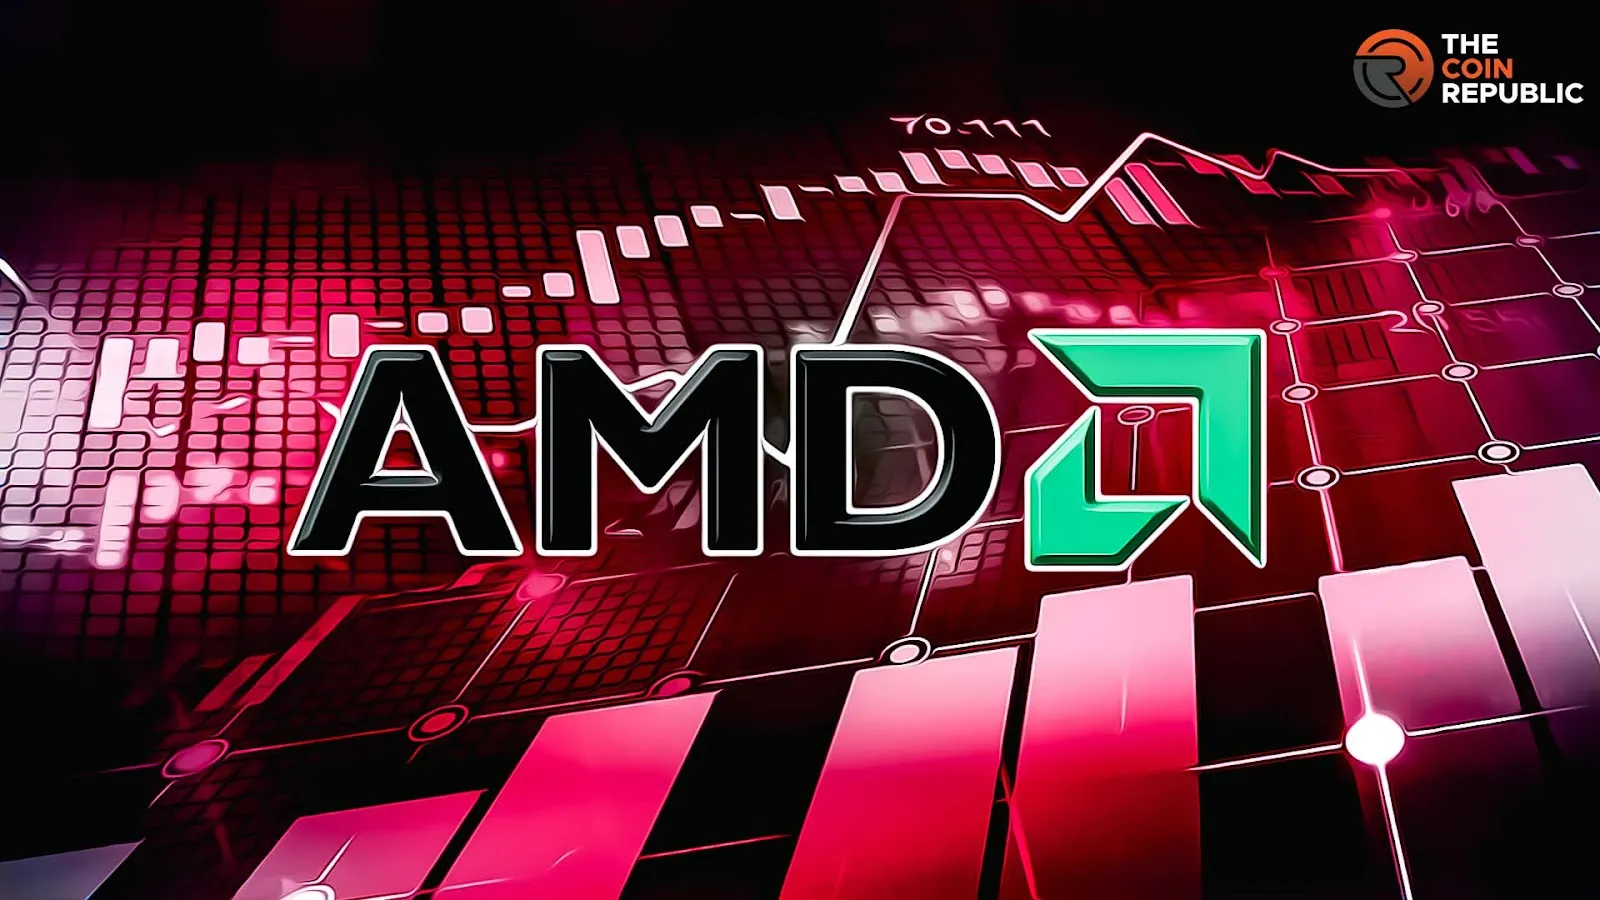 AMD Stock Price Recently Reached Its 52-Week High Price